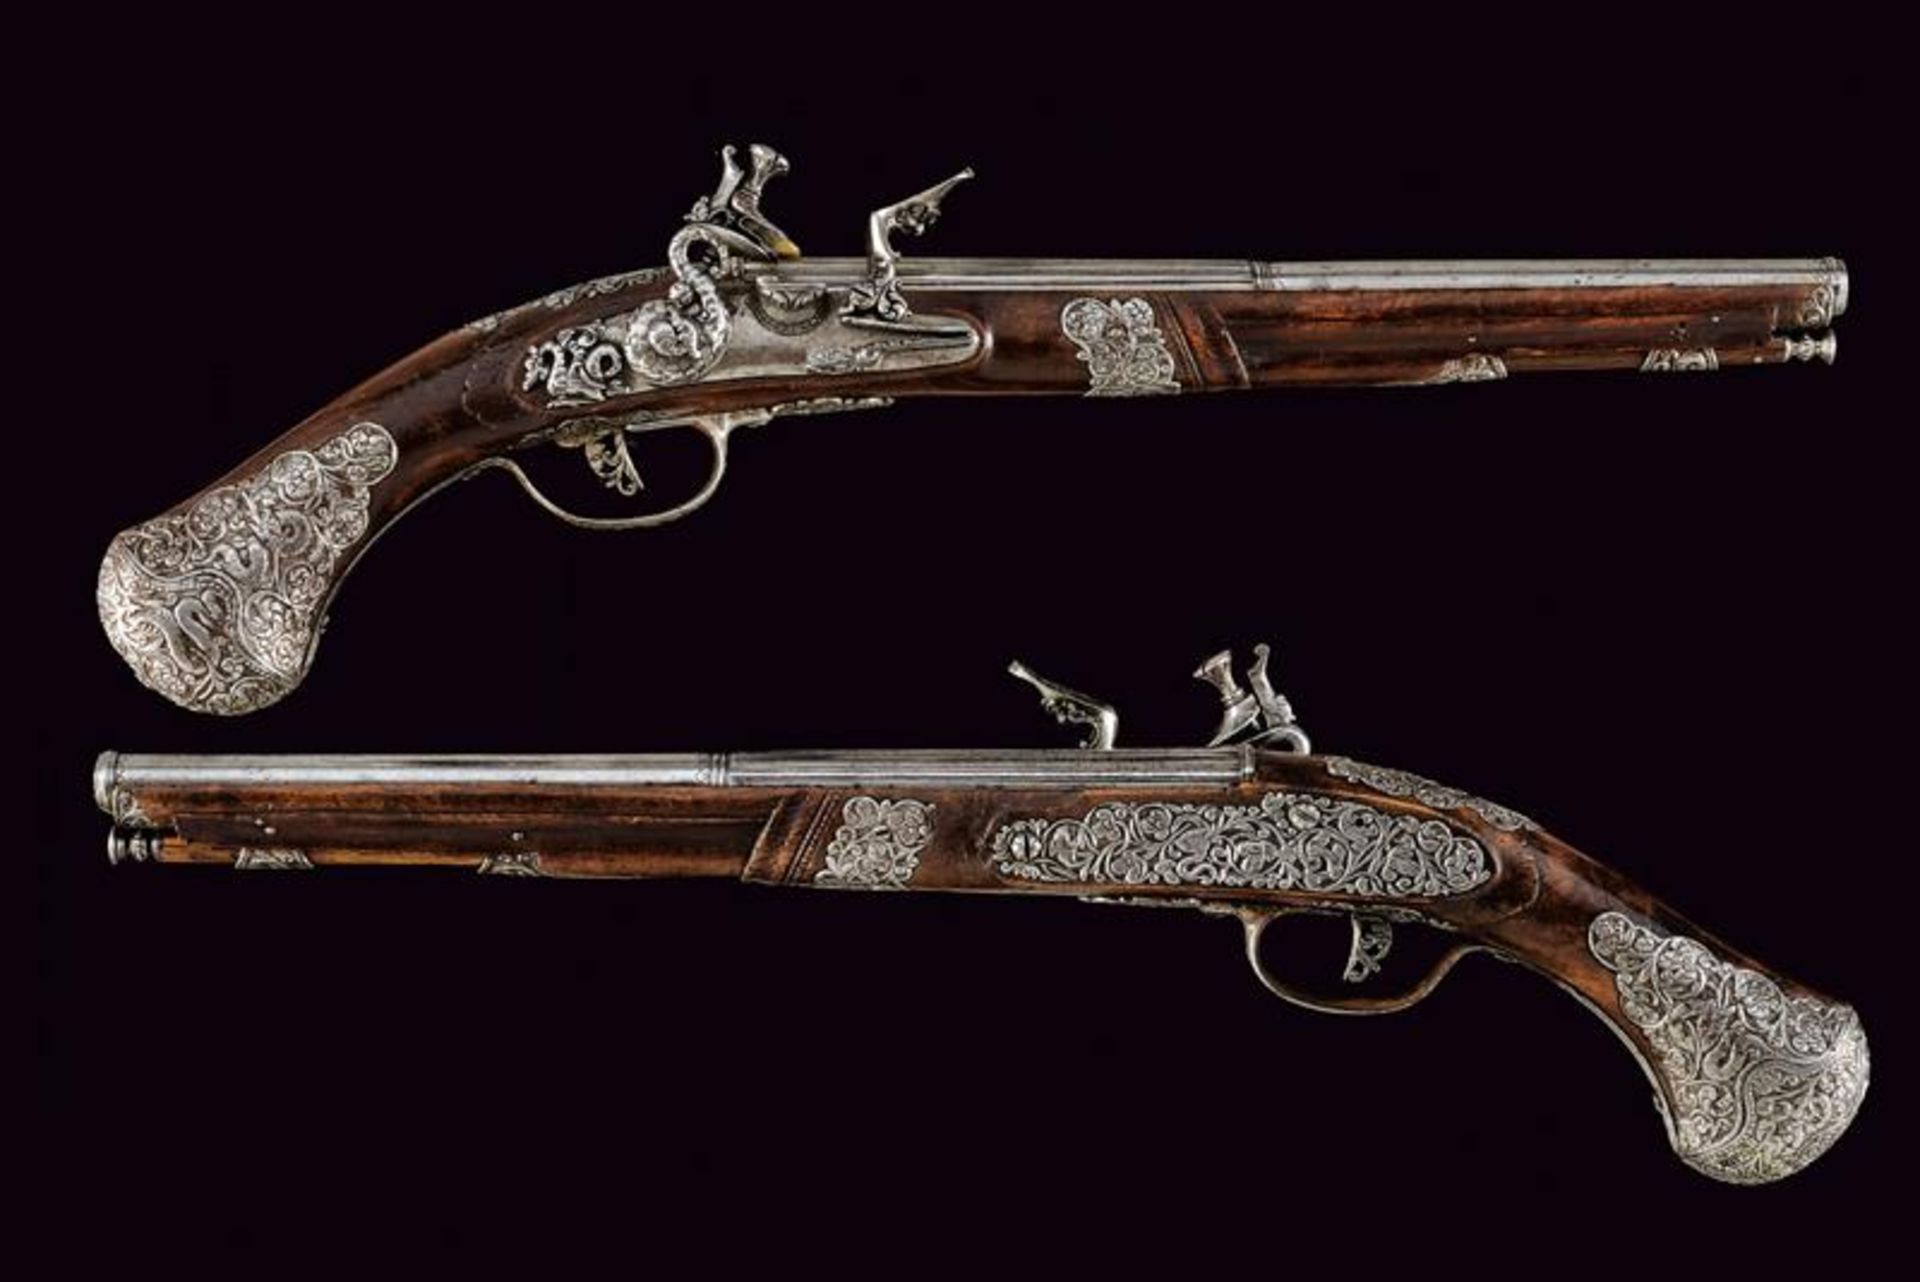 A beautiful and important pair of flintlock pistols, attributed to Ponsino Valet Borgognone